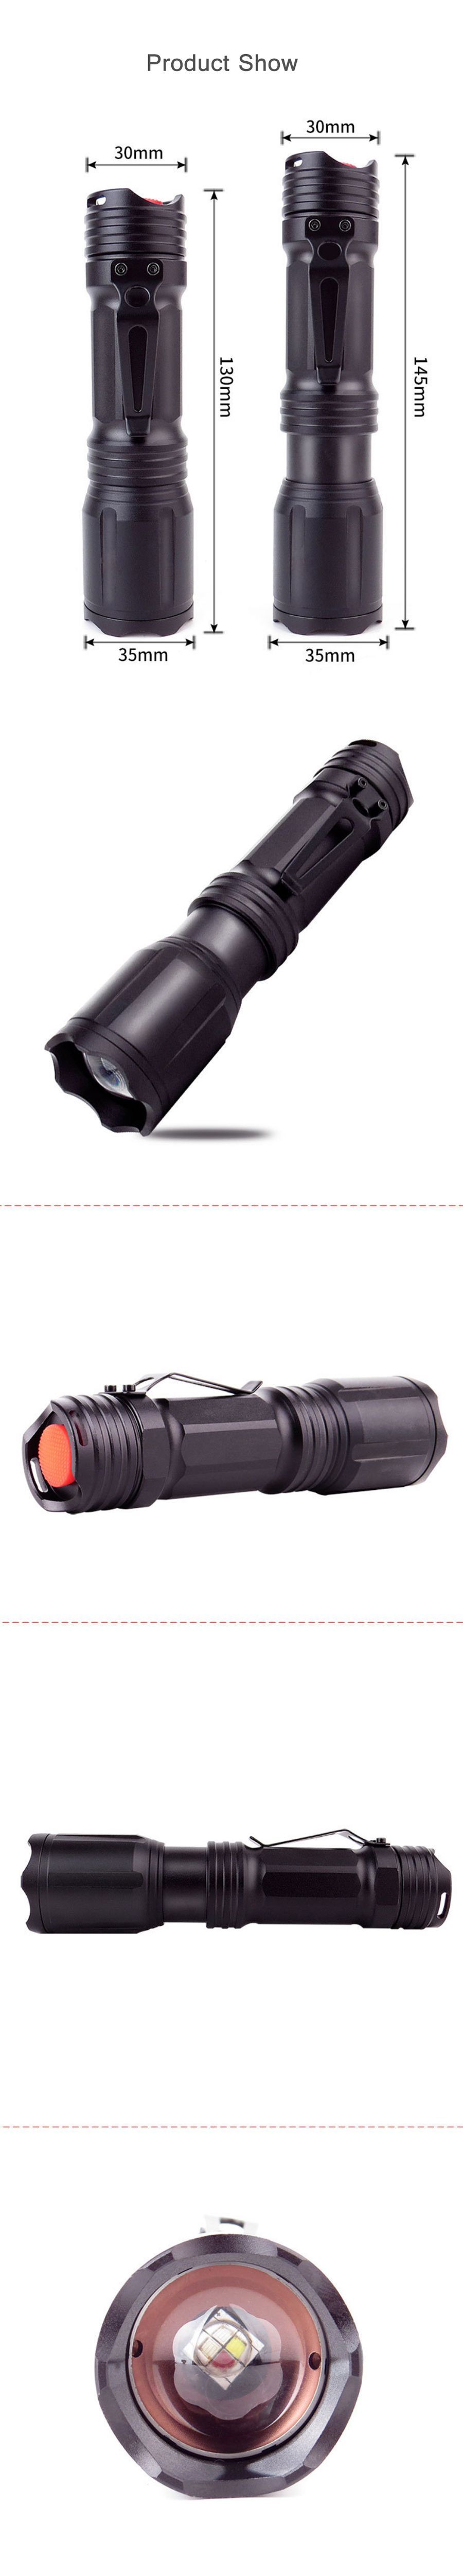 SL-A101-350LM-LEDRGB-4-Colors-Zoomable-Flashlight-USB-Rechargeable-LED-Torch-Waterproof-Camp-Light-1749977